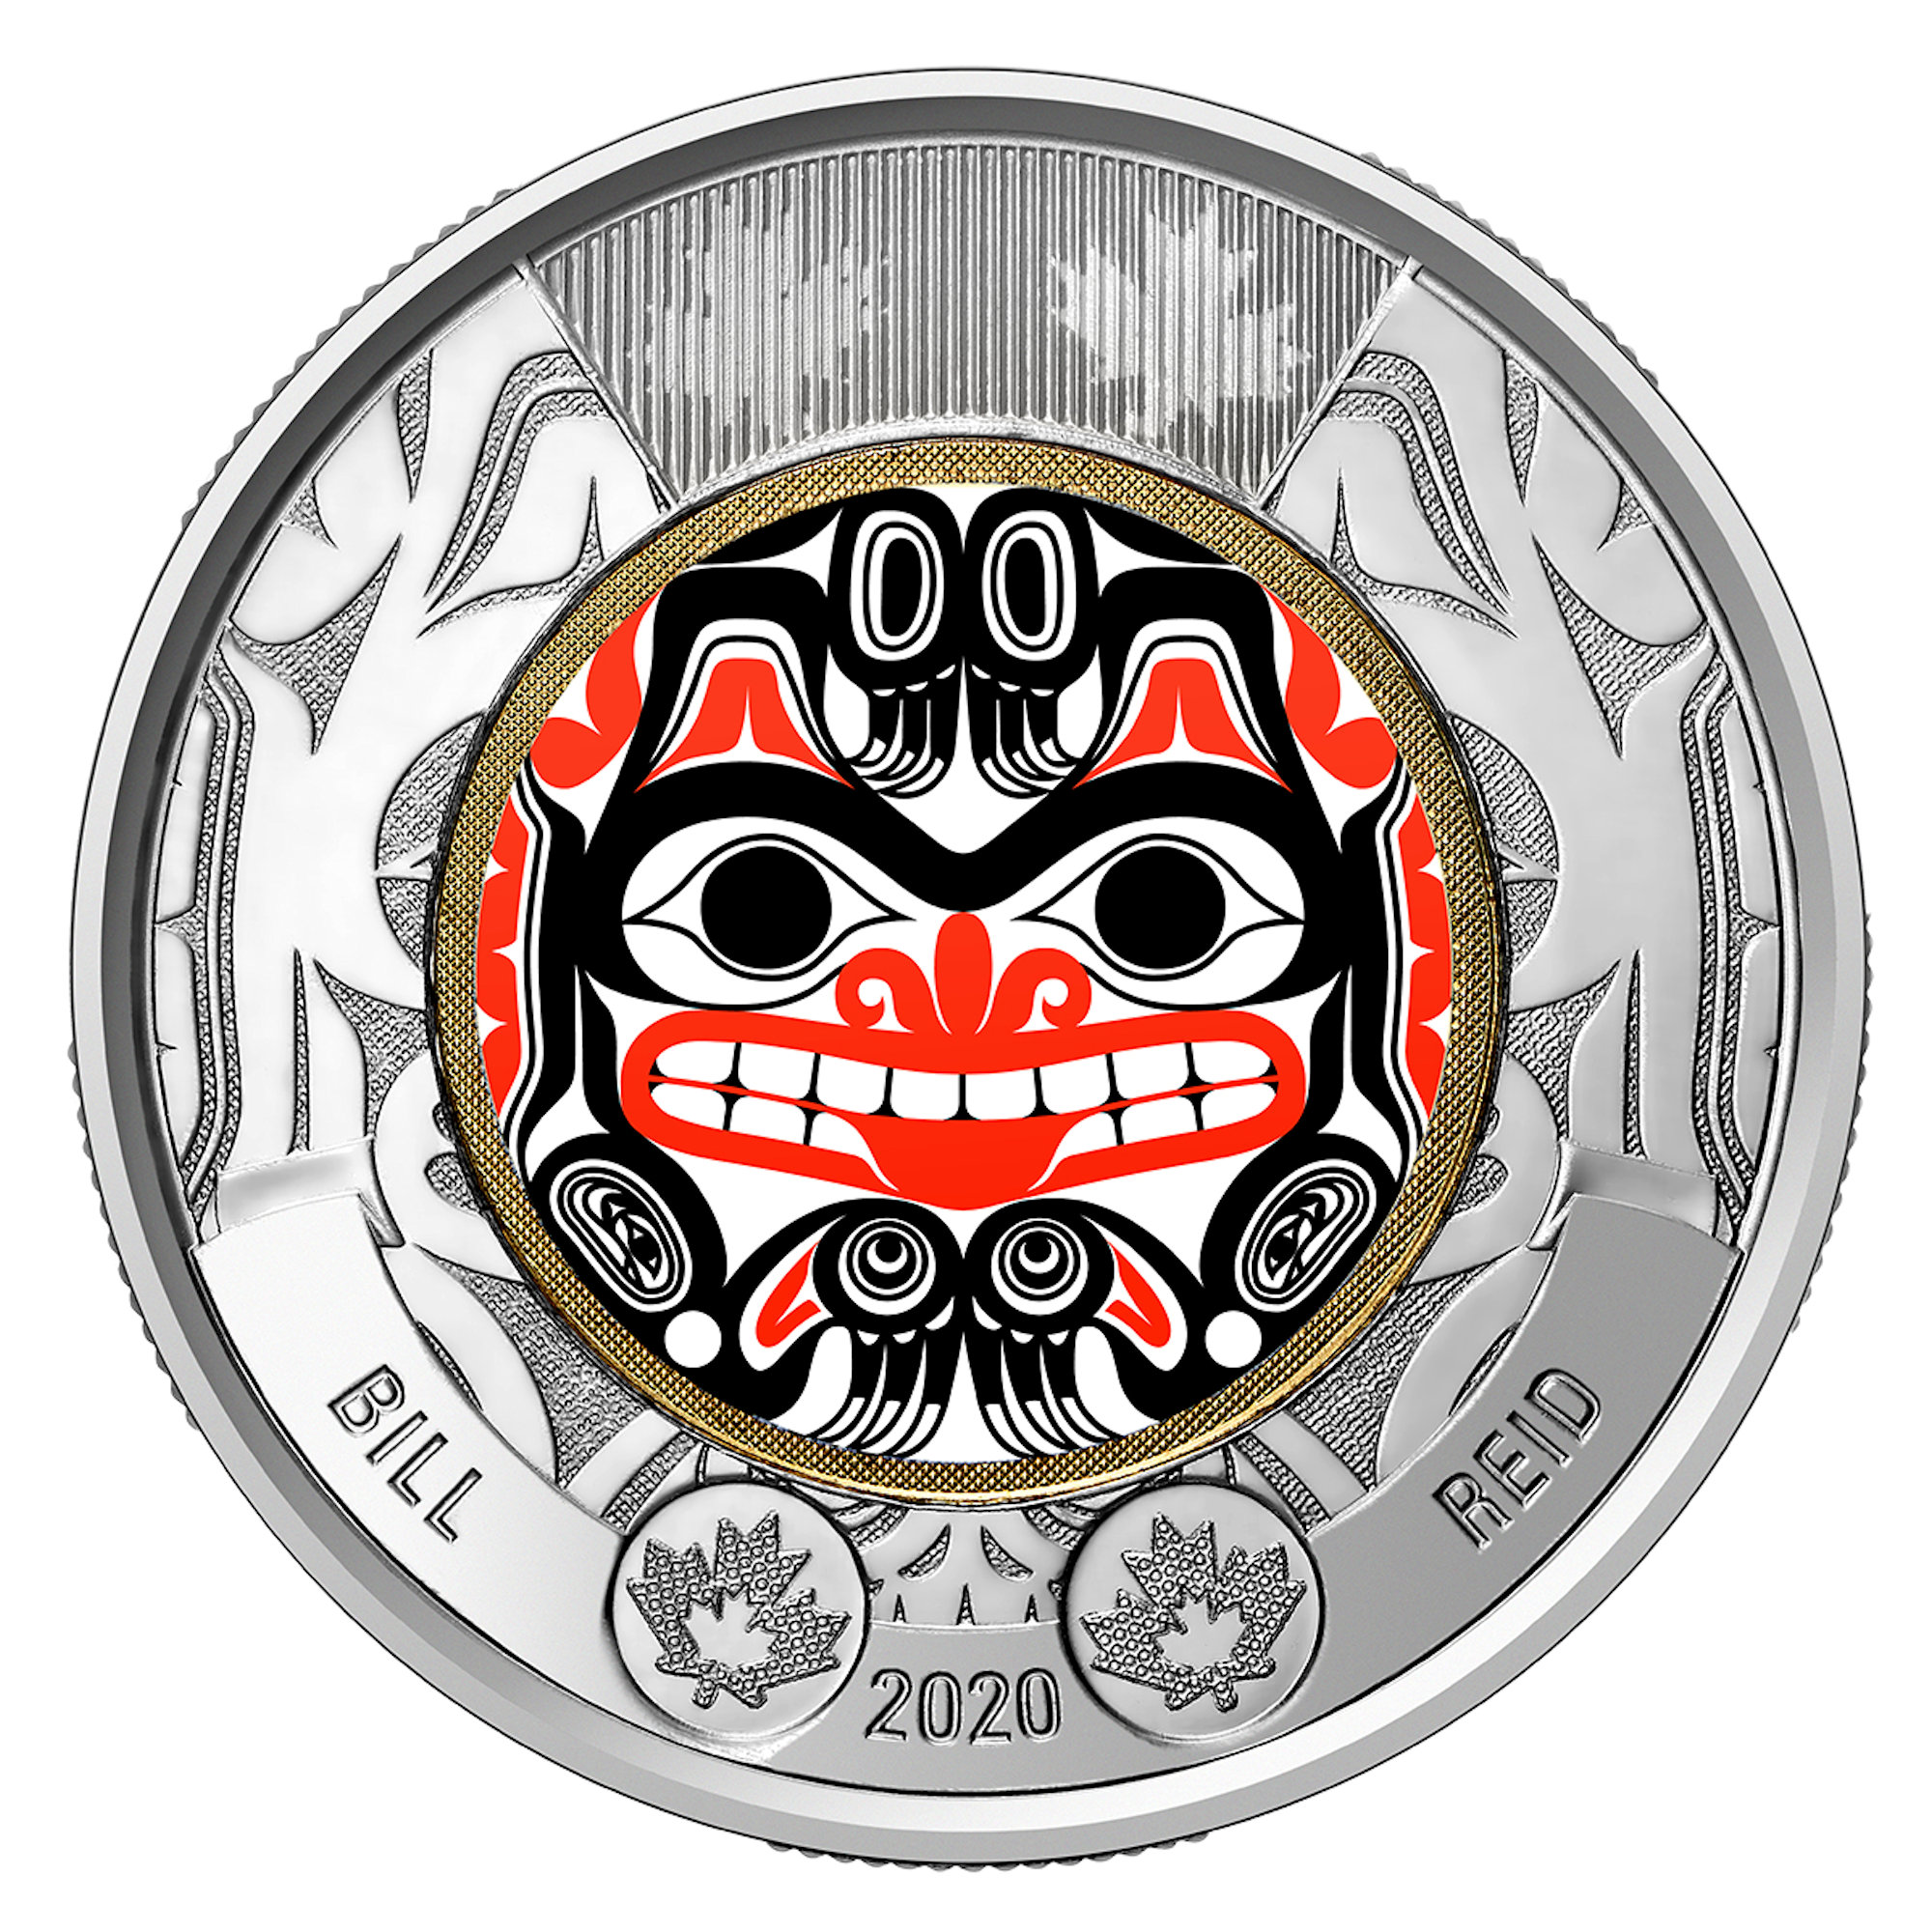 Canada 2000 $2 Coin Bear With Cubs Taking Them To The Path Of Knowledge. 